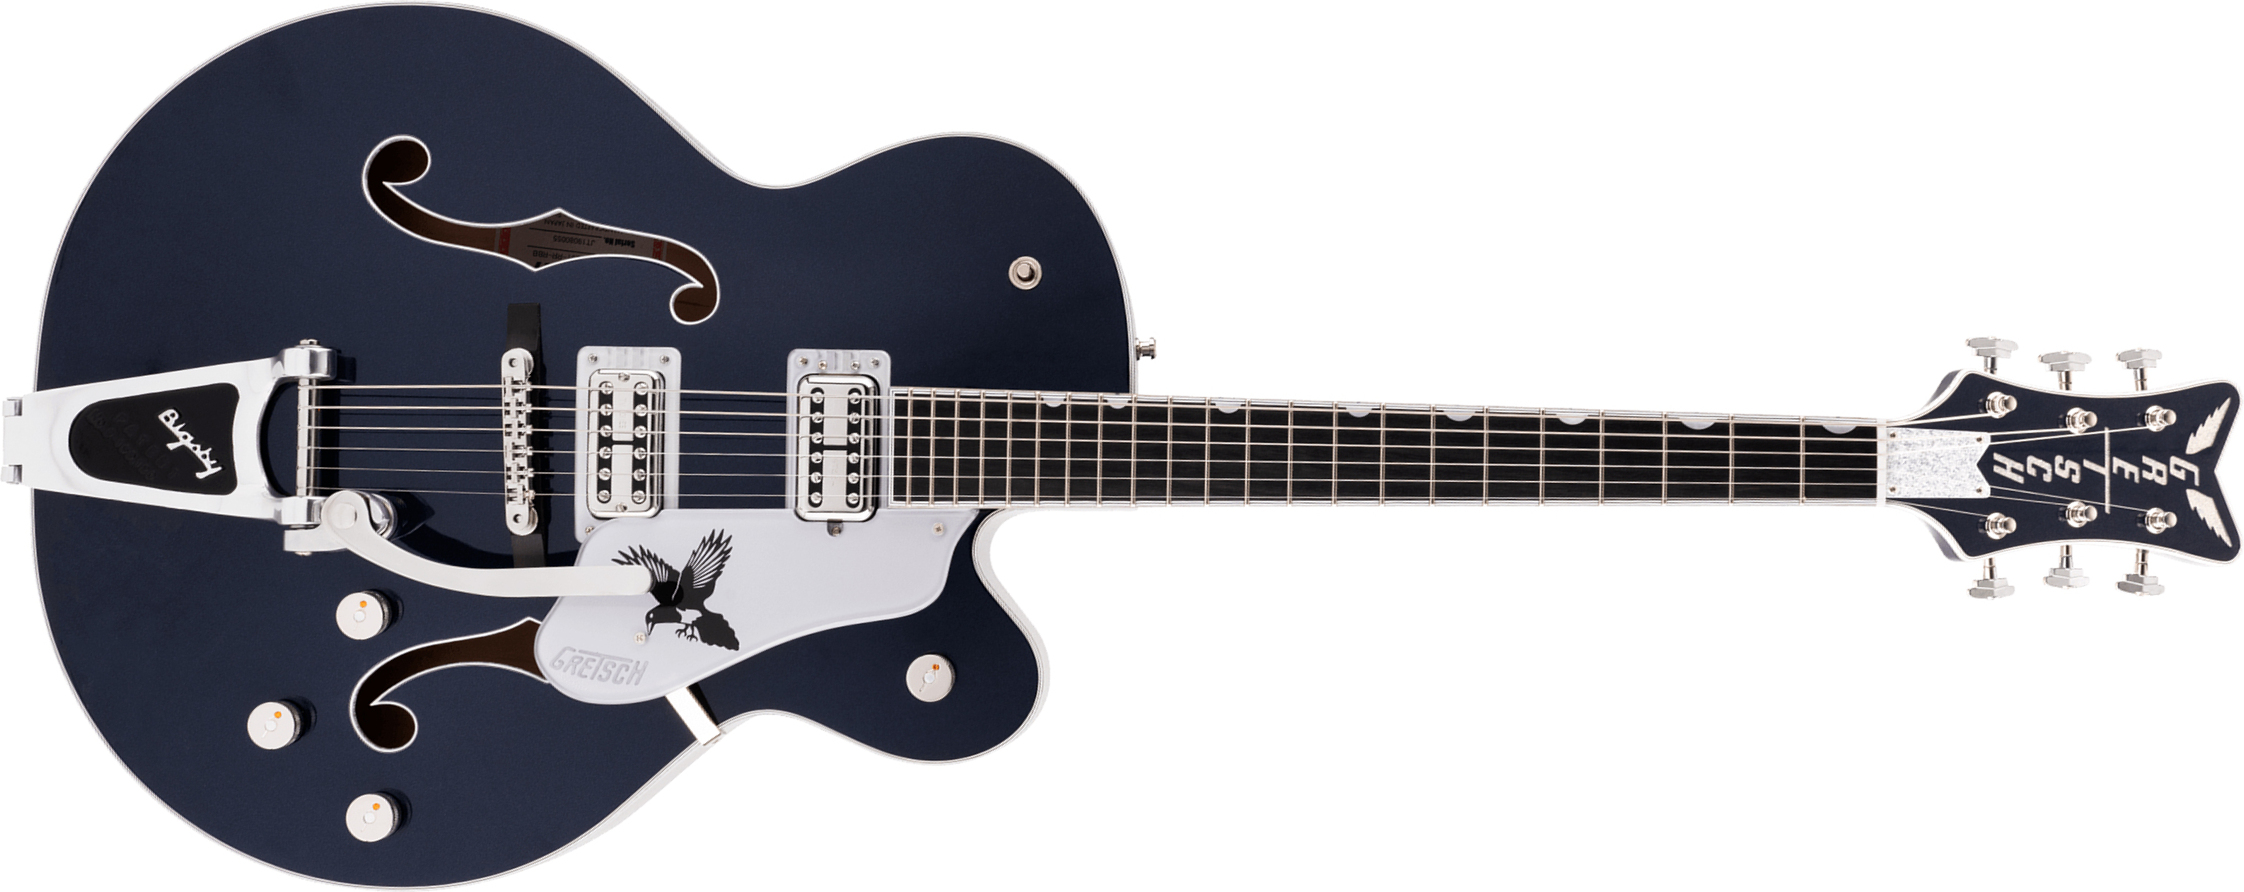 Gretsch Rich Robinson G6136t-rr Magpie Pro Jap Signature Hh Bigsby Eb - Raven's Breast Blue - Hollow-body electric guitar - Main picture